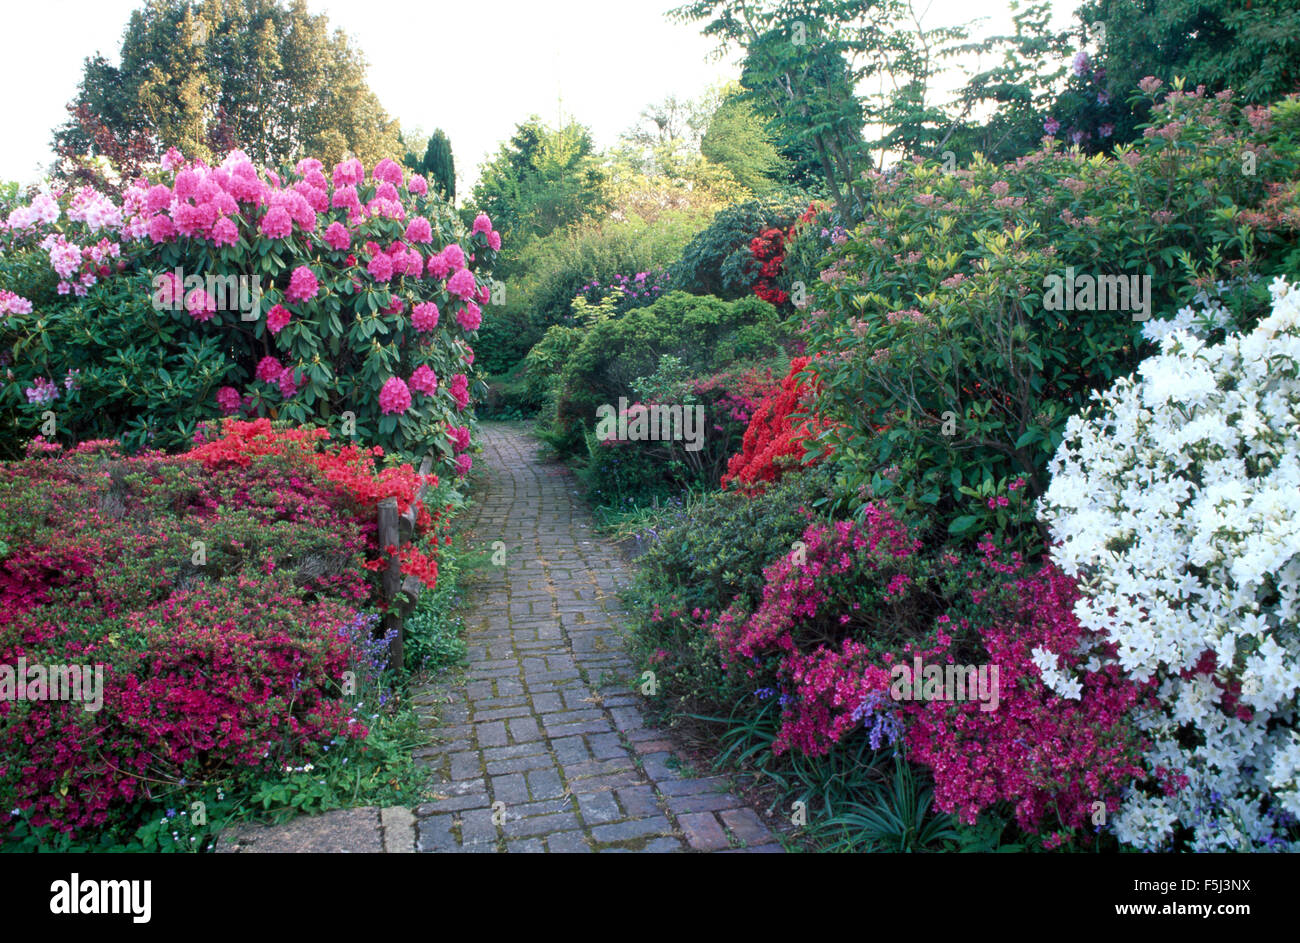 Paved path through borders with pink and white azaleas and rhododendrons in a large country garden in Spring Stock Photo